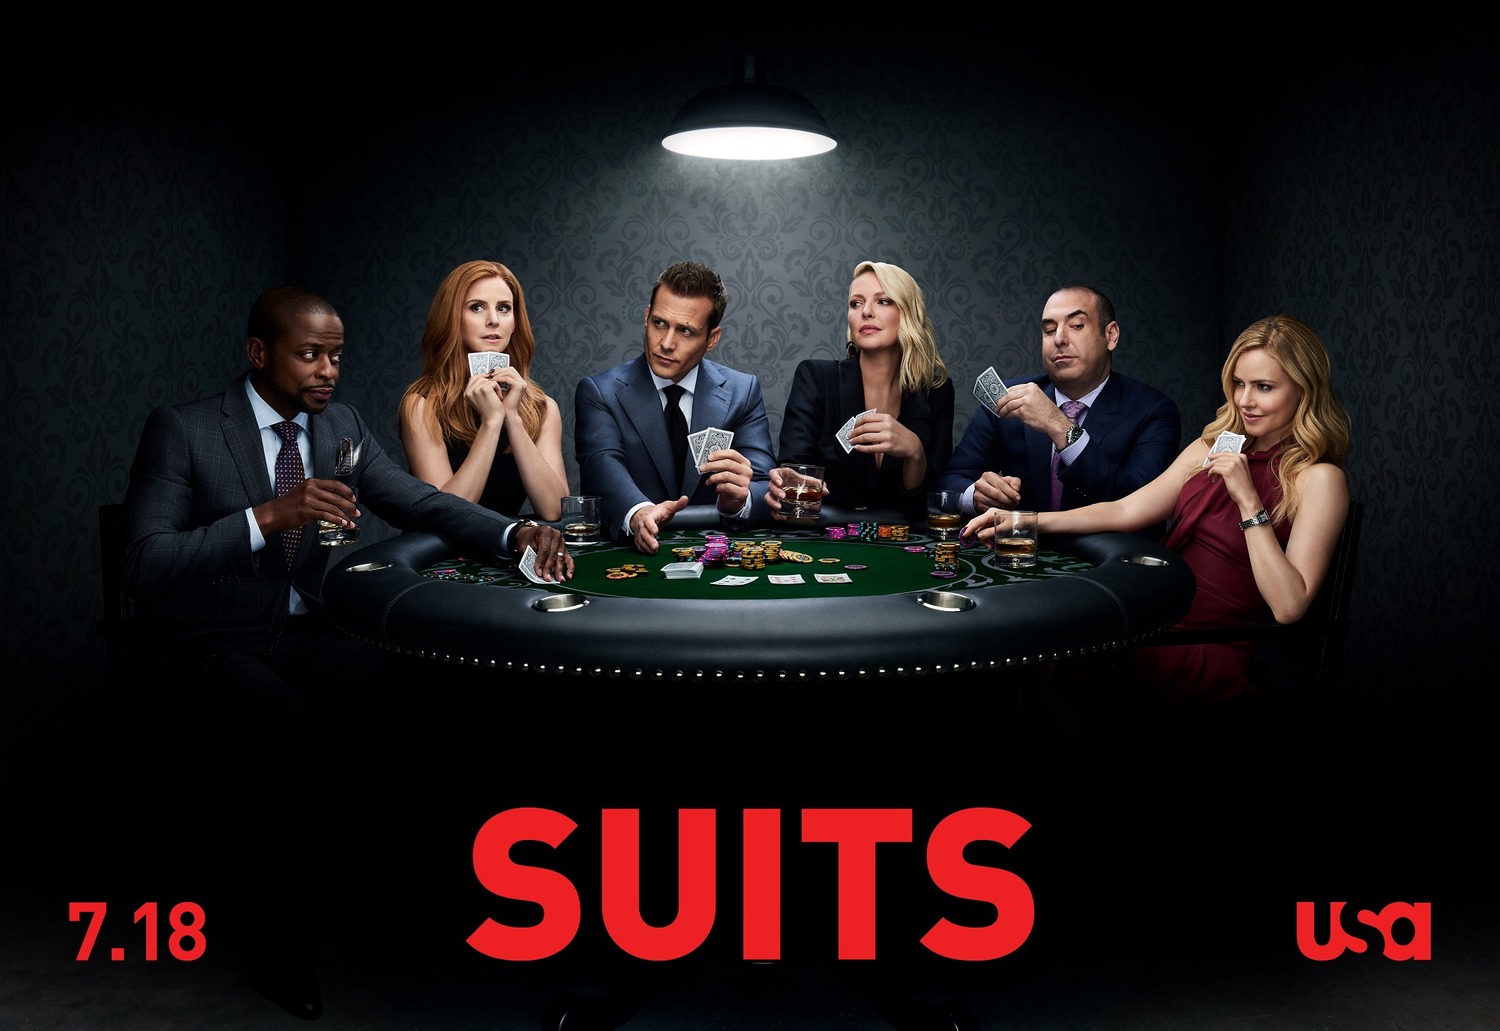 Extra Large TV Poster Image for Suits (#5 of 5)